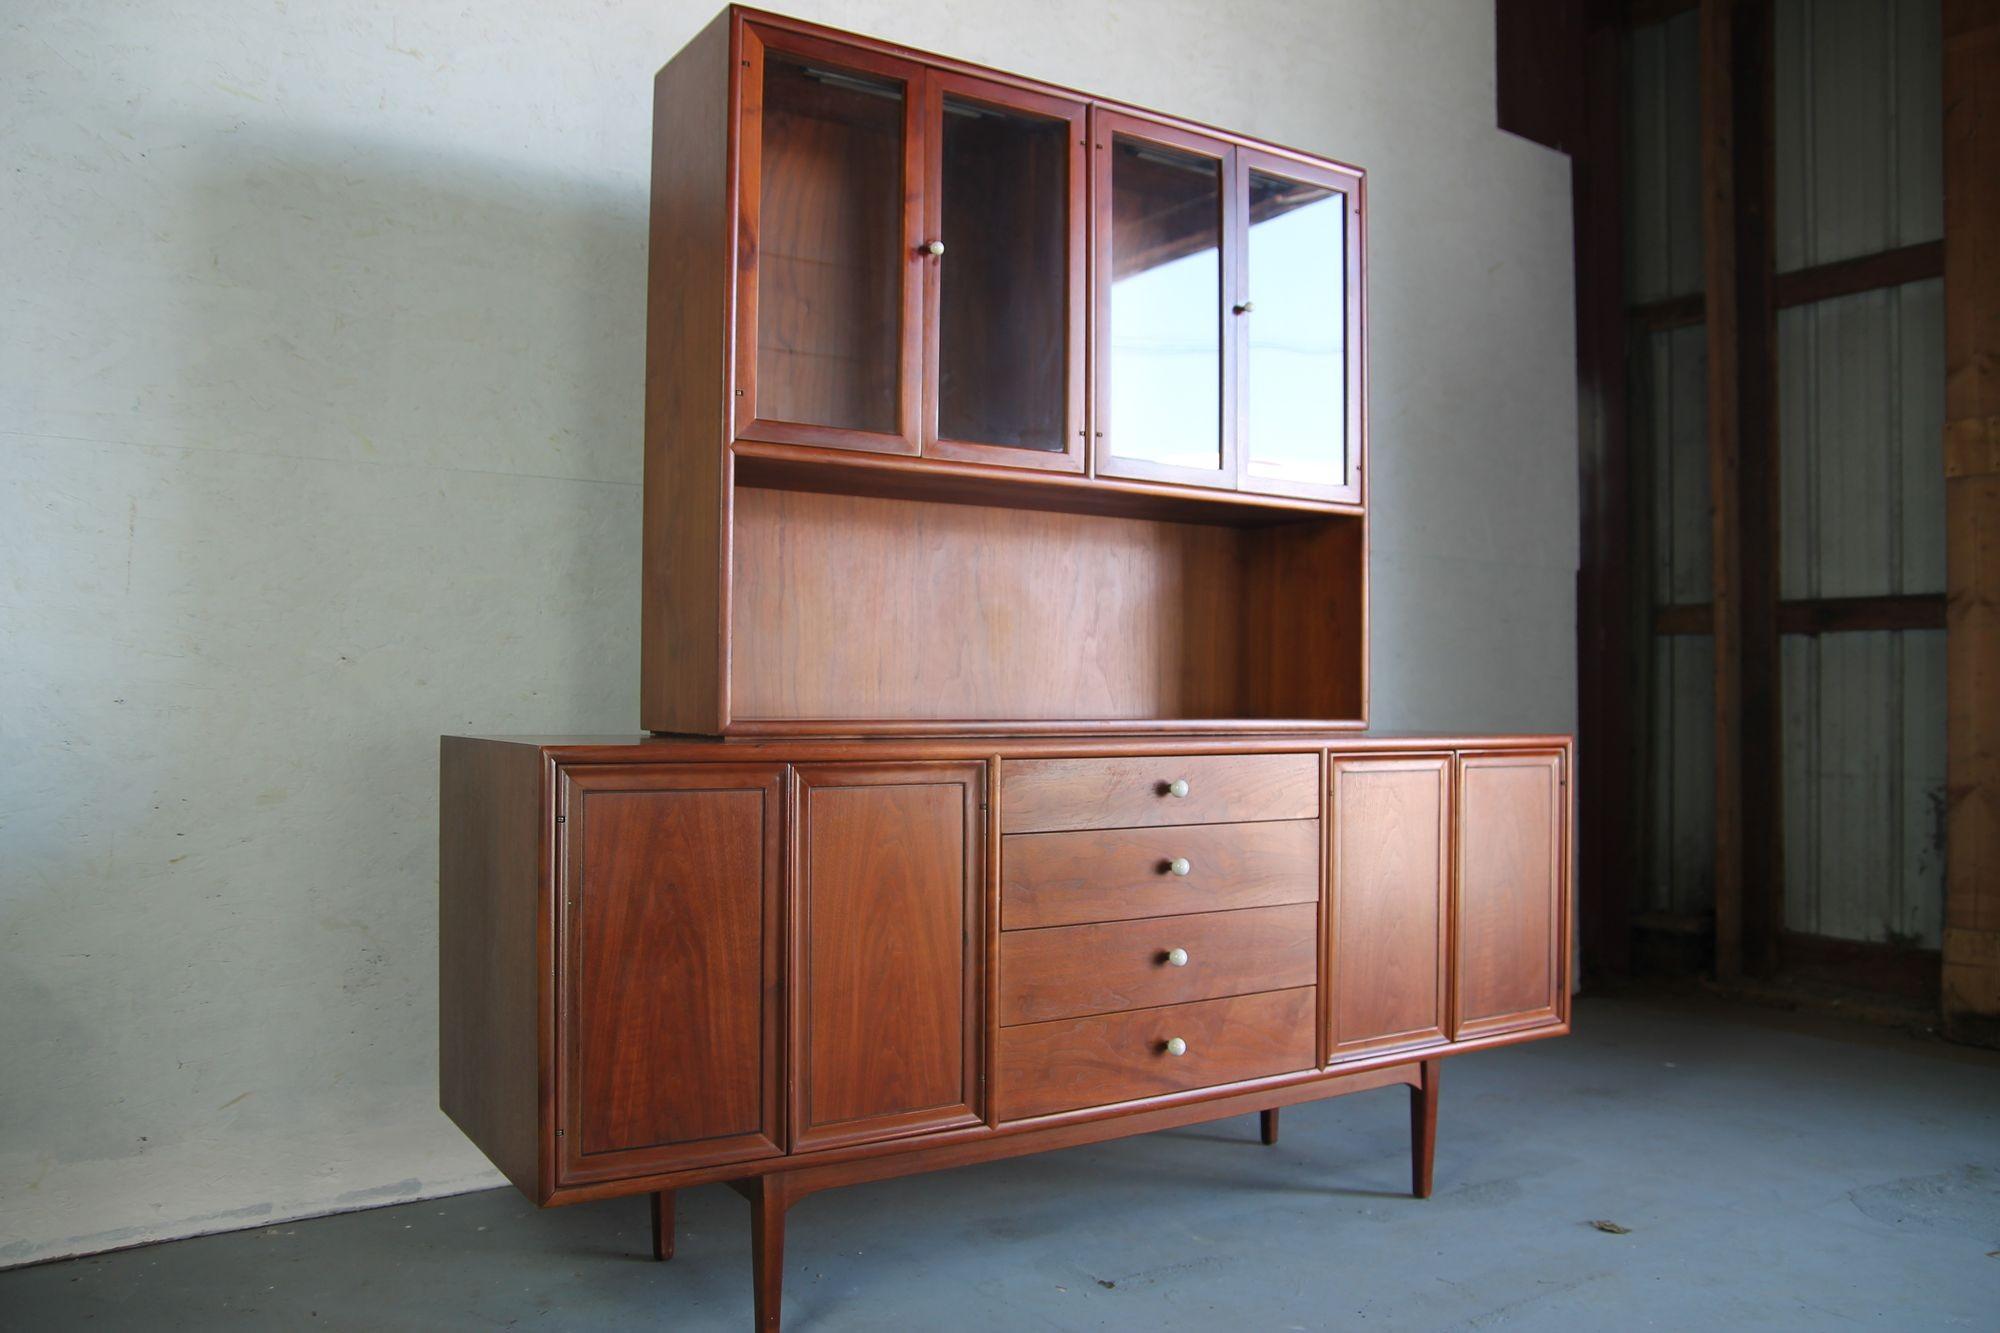 Great credenza and top cabinet my Kipp Stewart for Drexels Declaration line. The cabinet is a separate piece so the credenza can be used as a stand alone piece if desired. This nice 70's piece came from the original owner. In original condition and